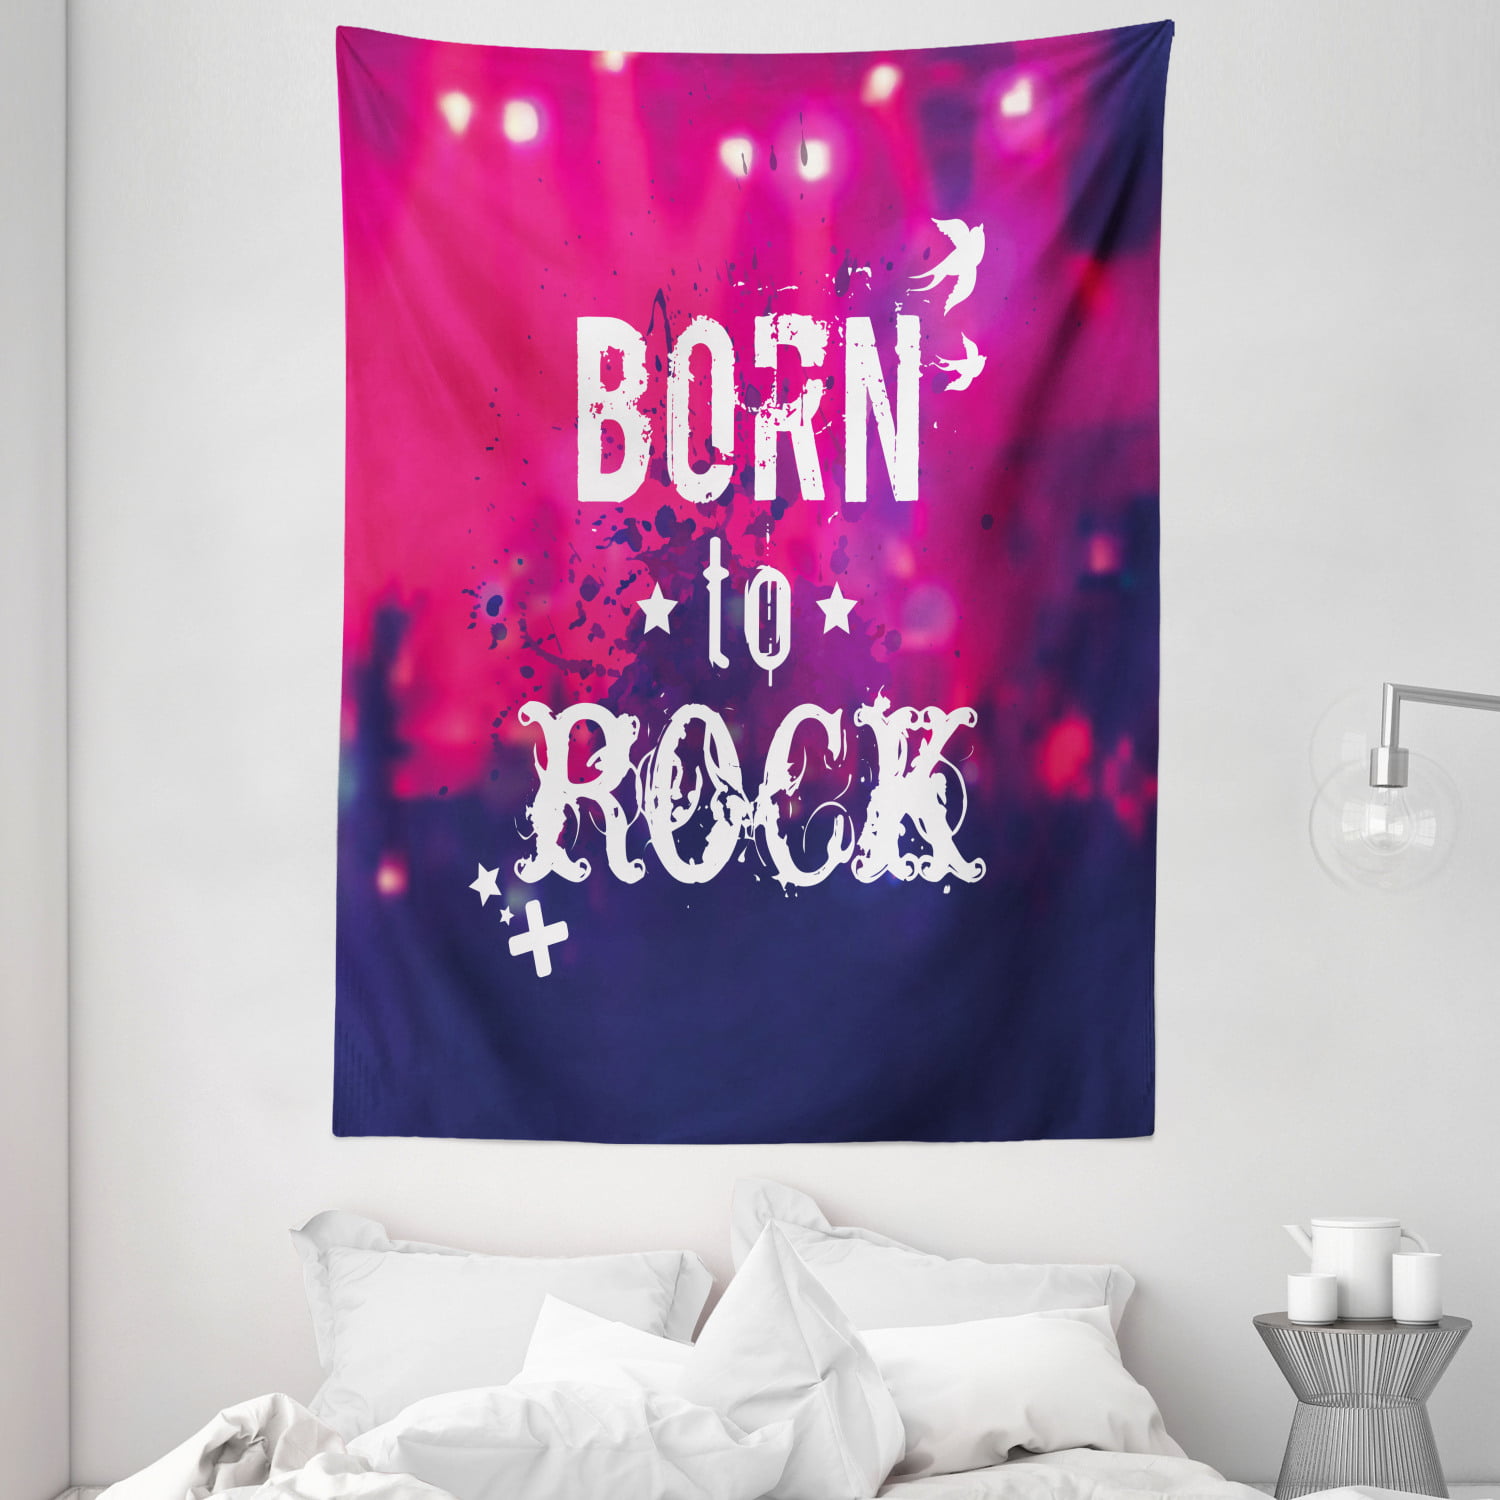 Popstar Party Tapestry Wall Hanging Art Bedroom Dorm 2 Sizes Ambesonne 